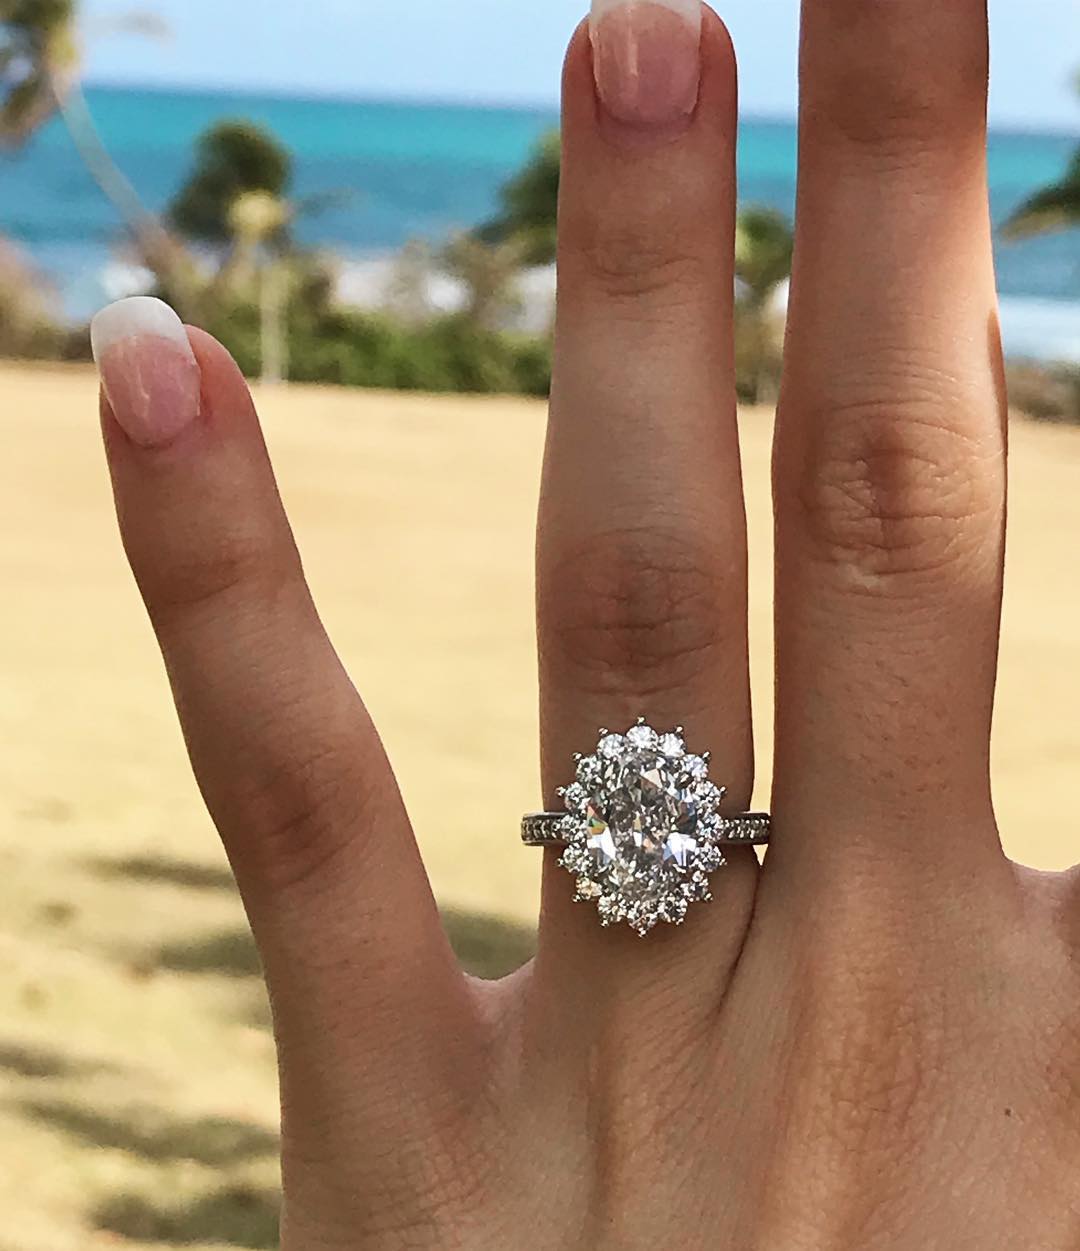 Floral Halo Engagement Ring - Wimmers Diamonds | Wimmers Diamonds